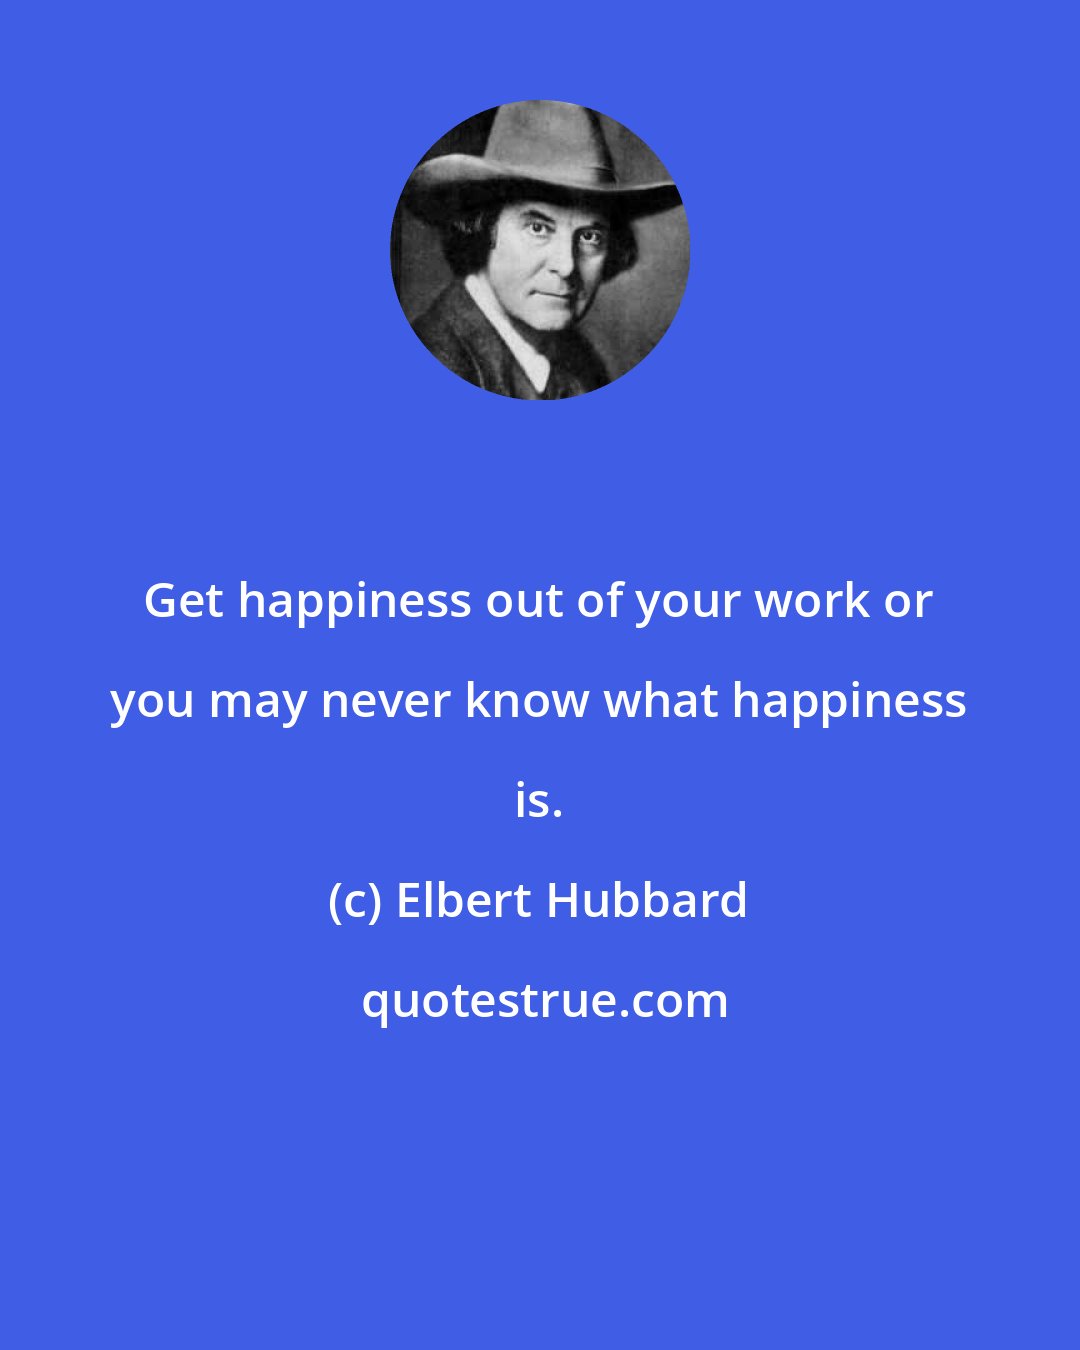 Elbert Hubbard: Get happiness out of your work or you may never know what happiness is.